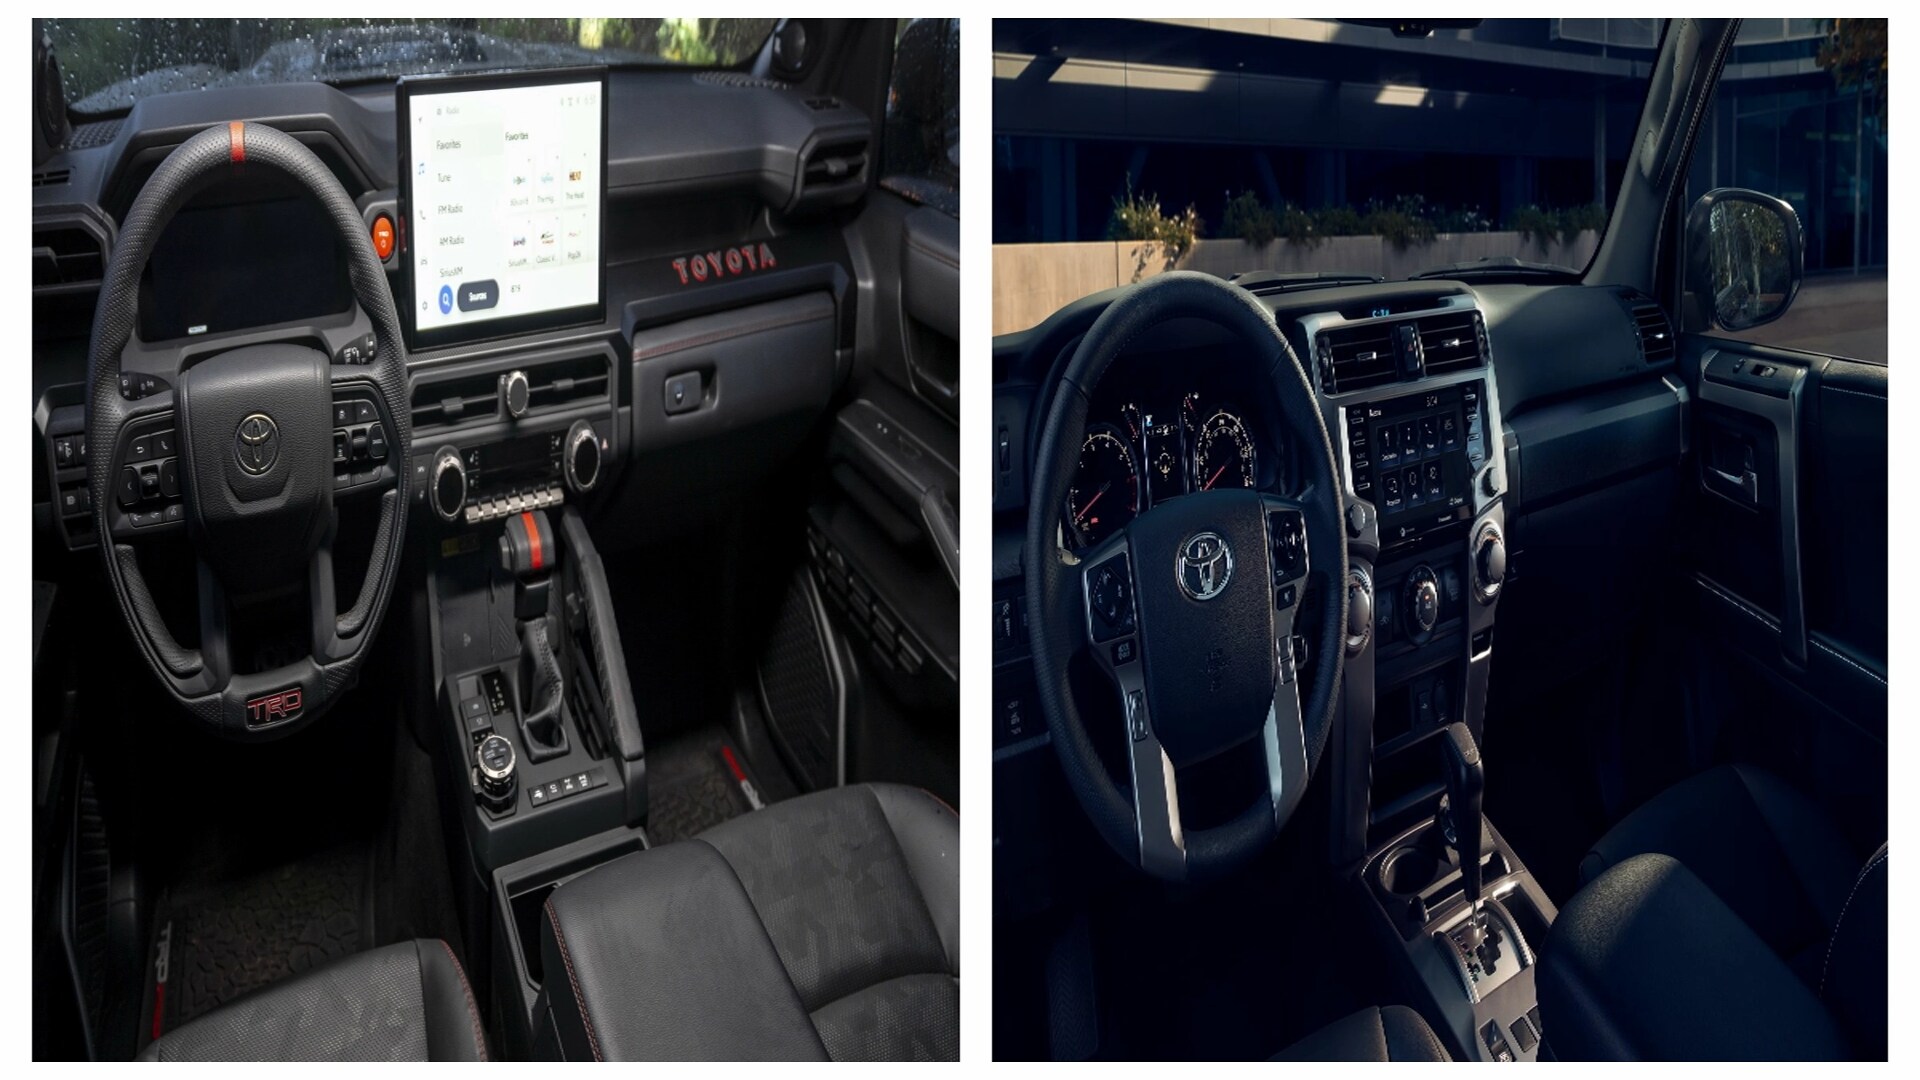 The Interiors Of The 2025 (Left) And 2024 (Right) Toyota 4Runner (Credits Toyota USA Newsroom)